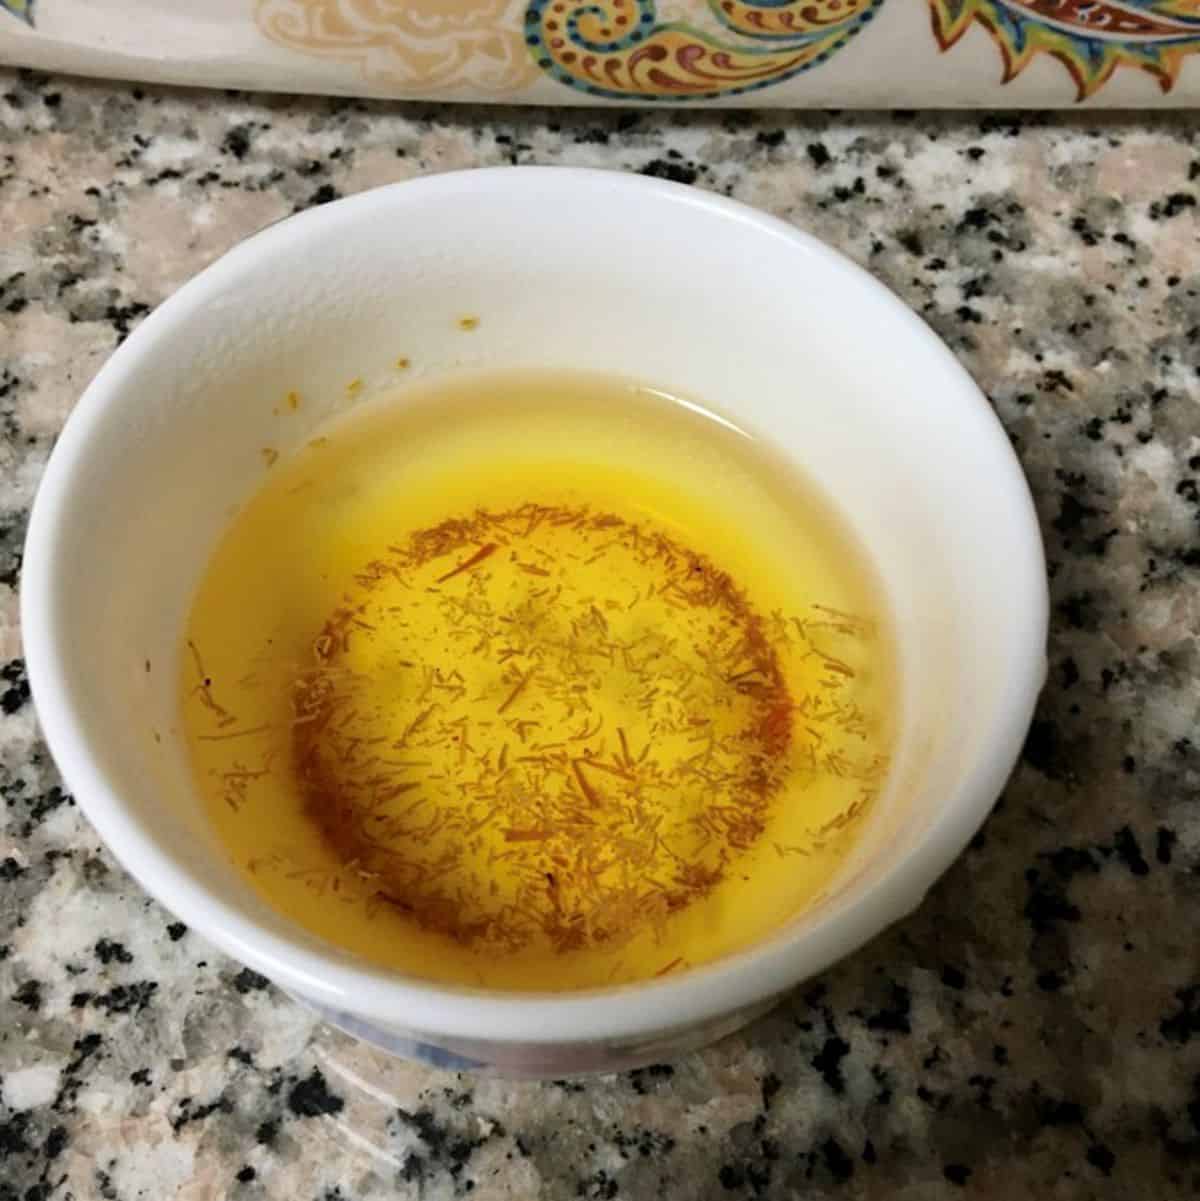 saffron infused water in a small white bowl.